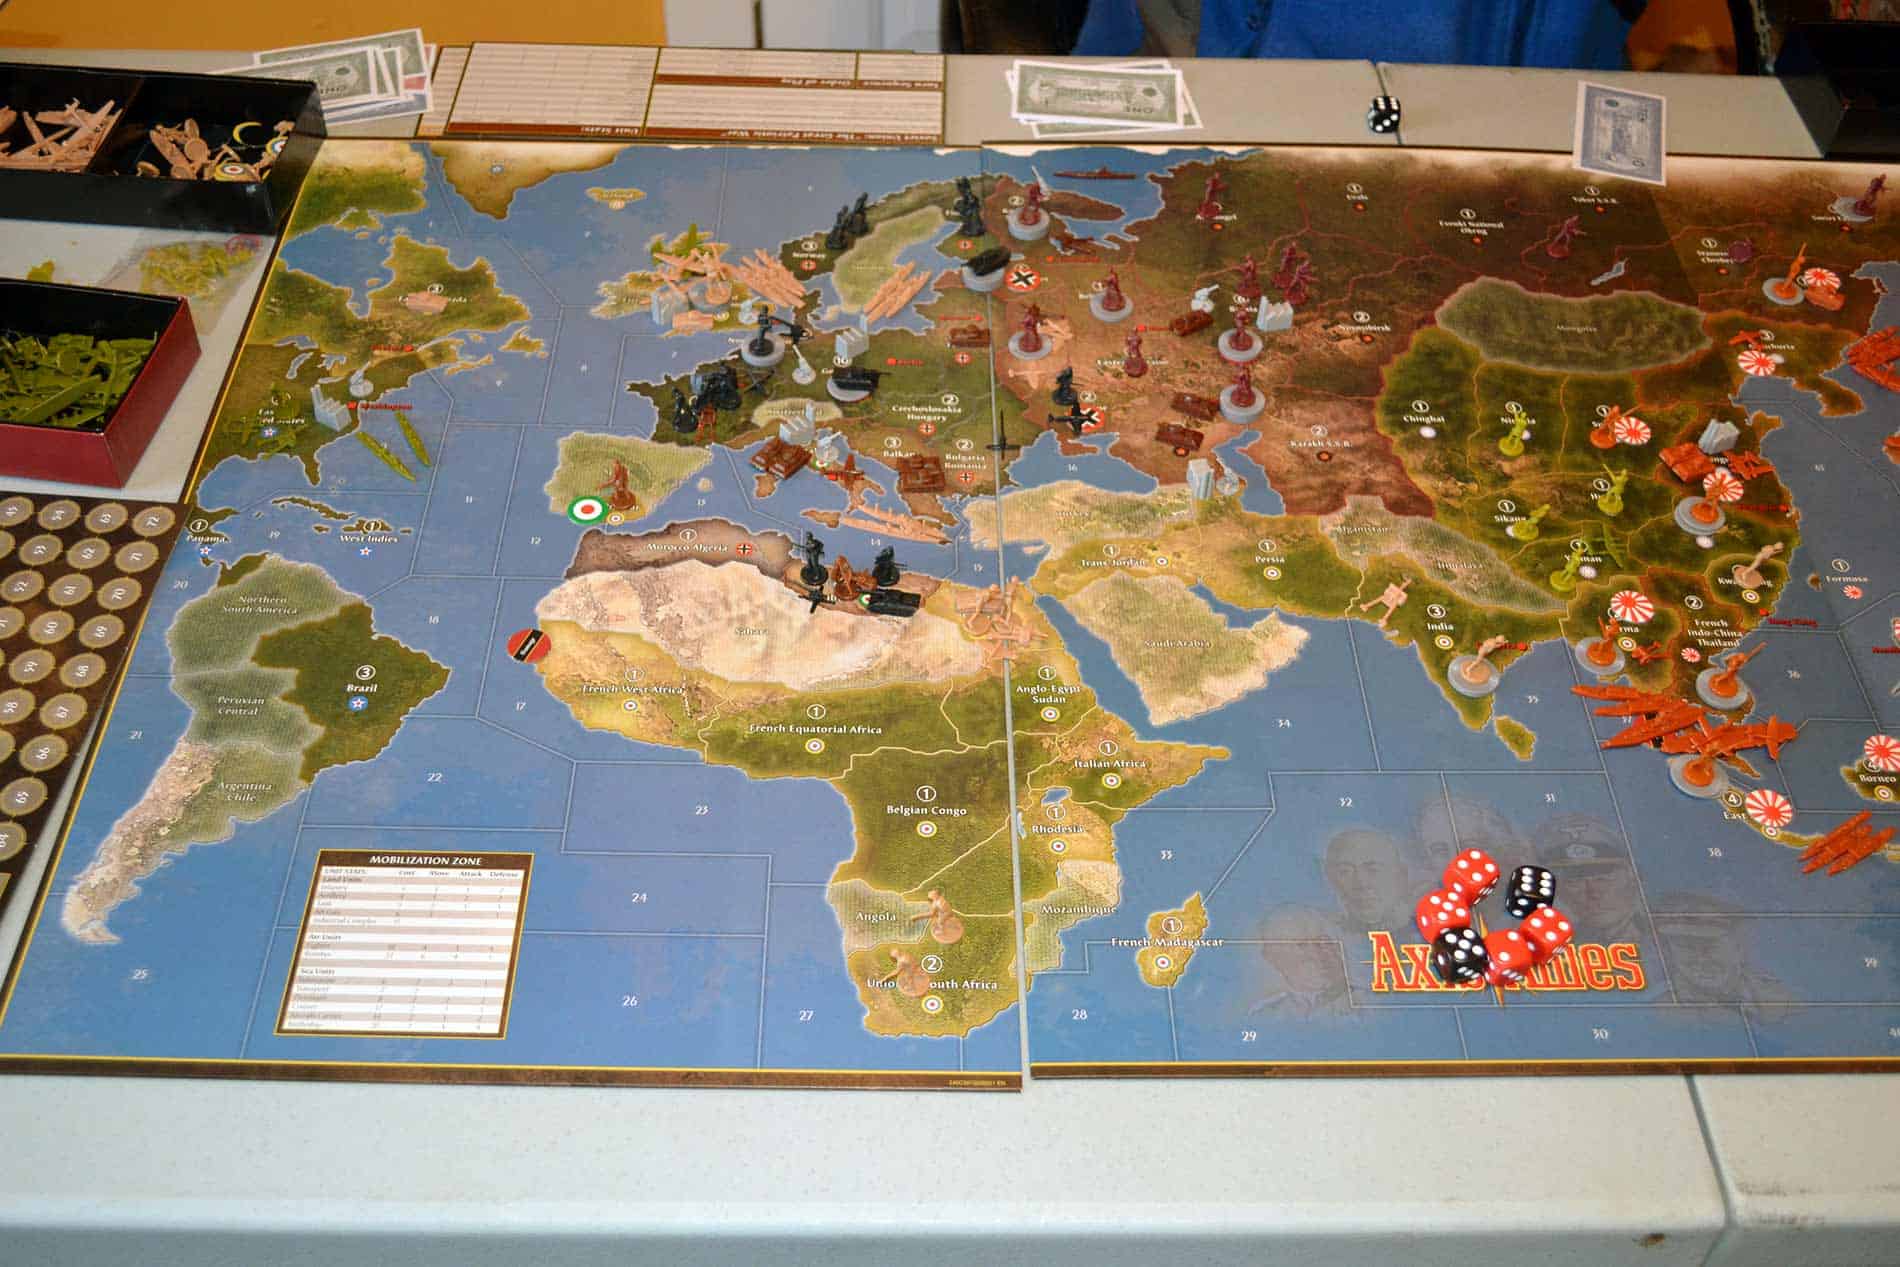 axis and allies anniversary edition strategy